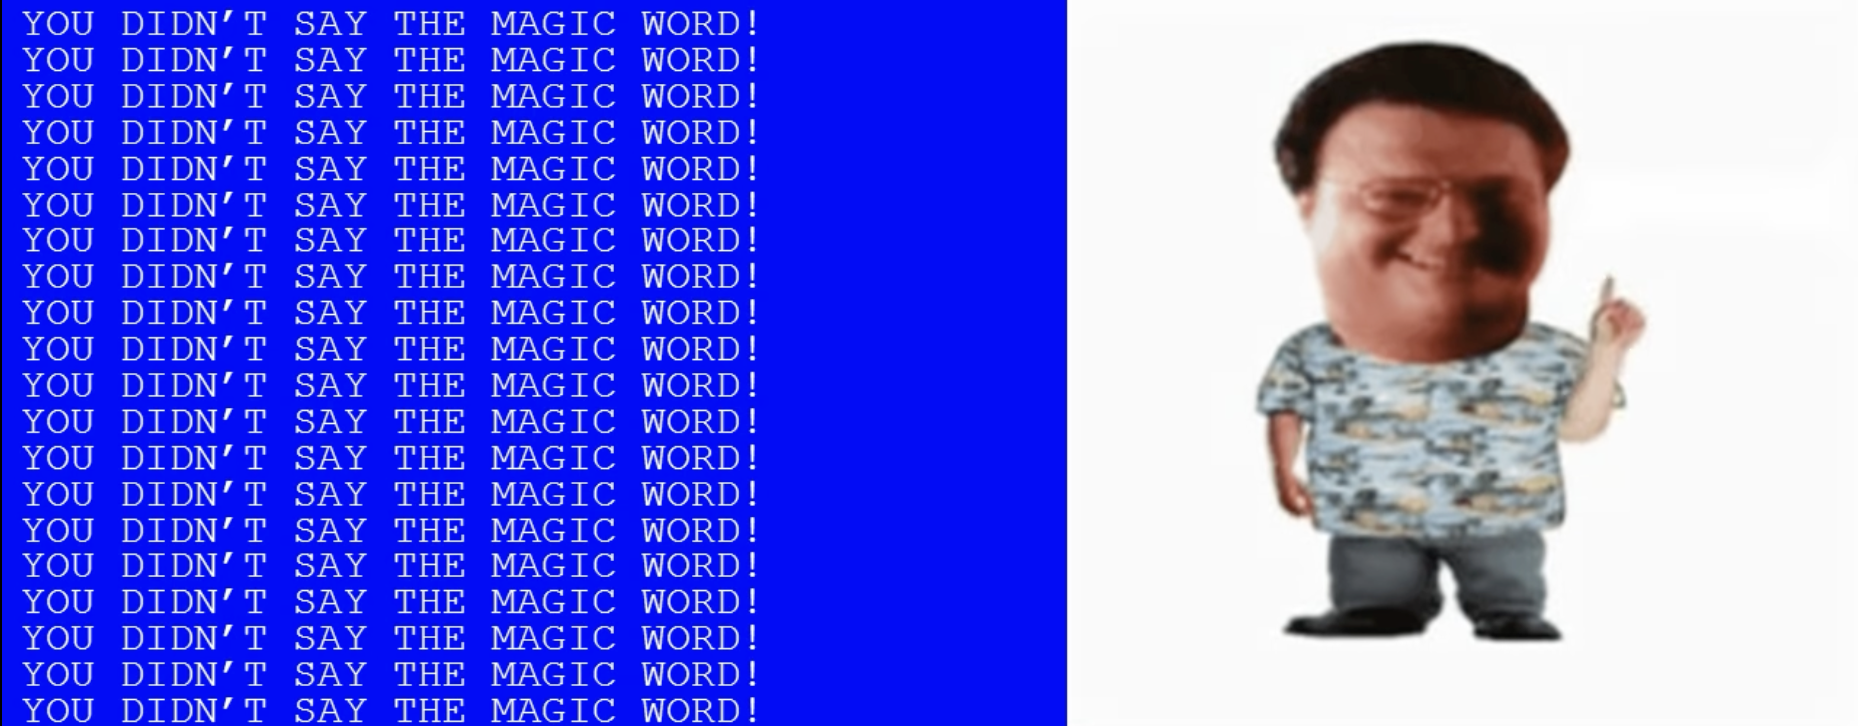 Screenshot of the computer from Jurassic Park with repeating monospace text in all caps saying 'you didn't say the magic word' and a photo of the antagonist's (Nedry's) head on a cartoon body wagging his finger.